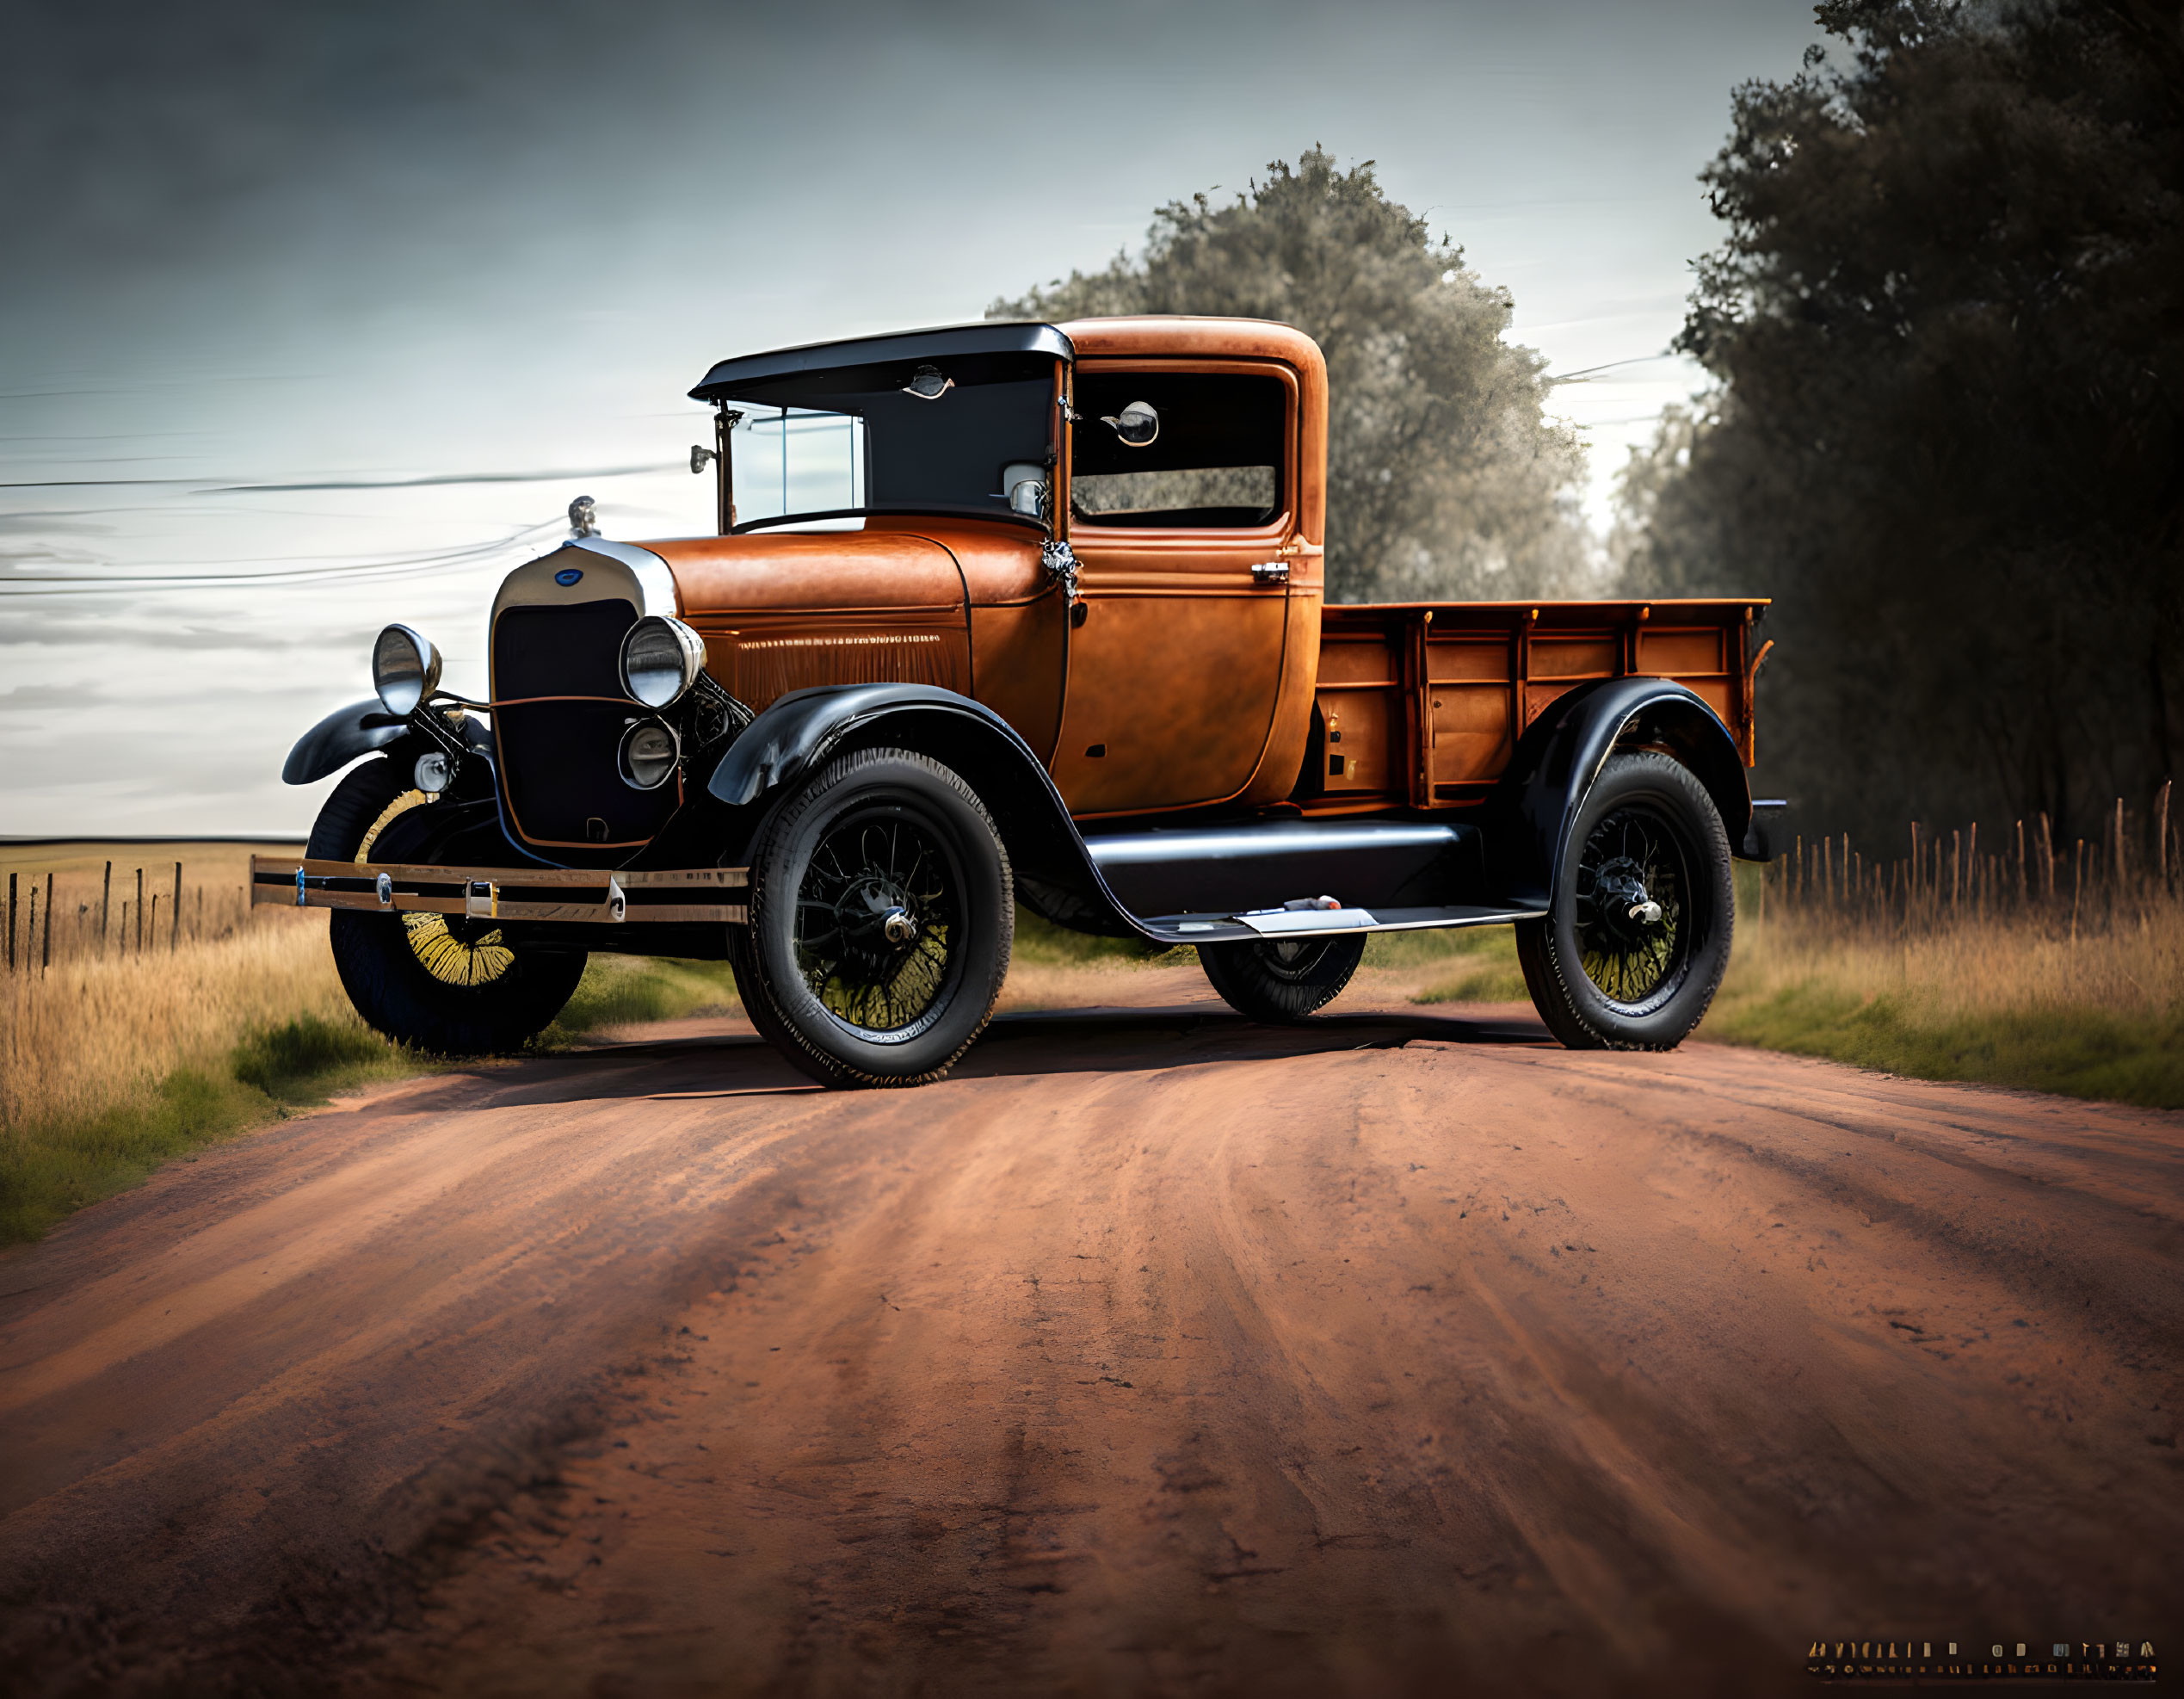 Classic Brown Pickup Truck on Dirt Road with Trees and Cloudy Sky